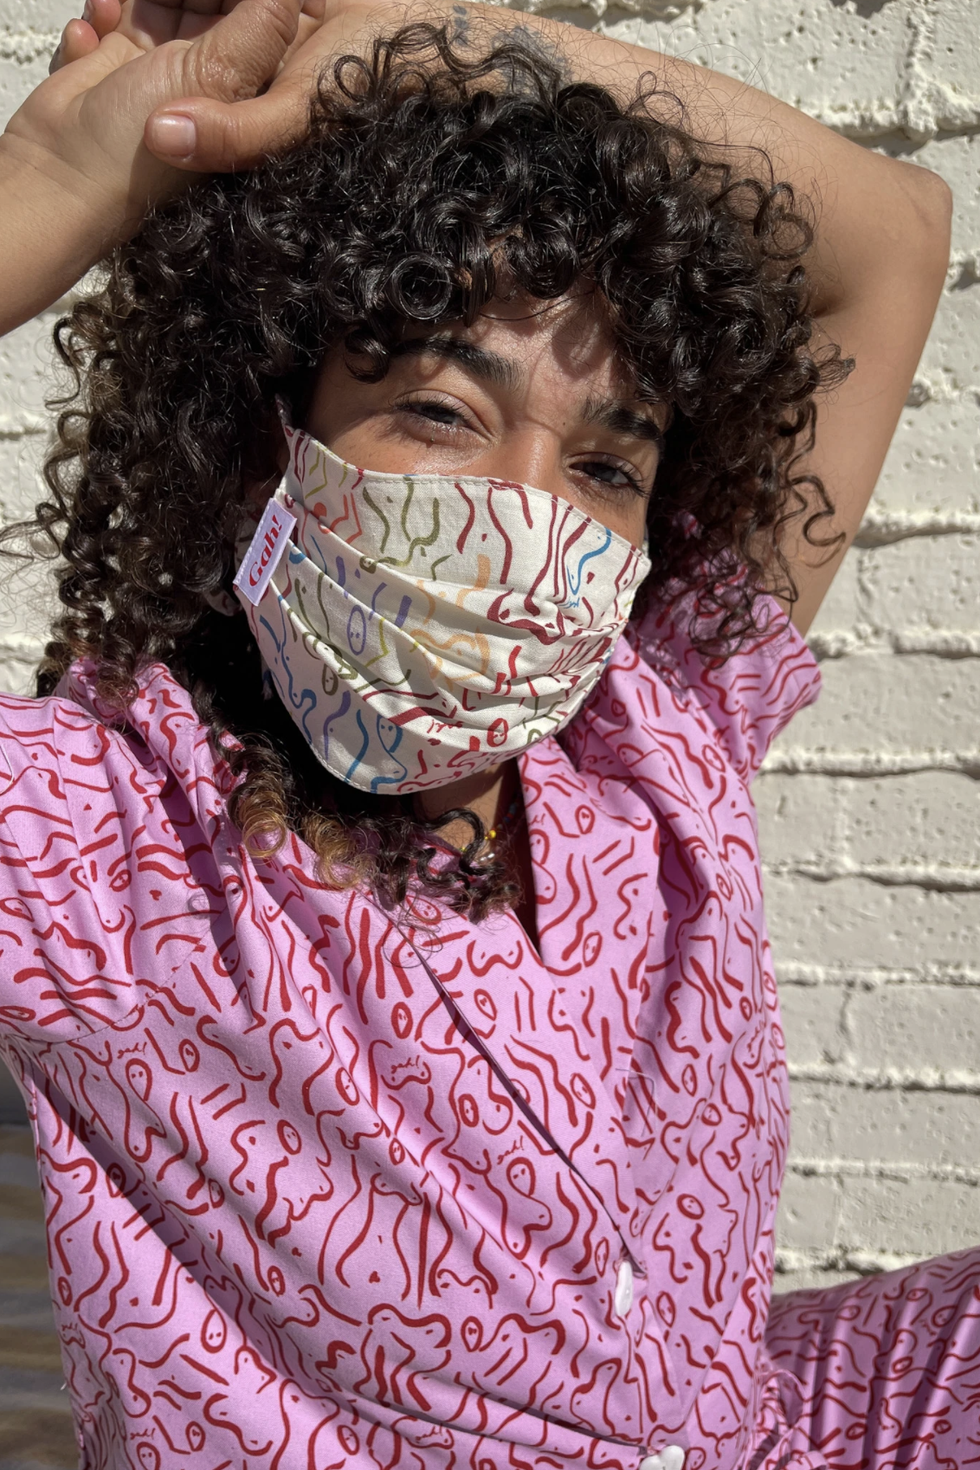 Local Trans Fashion Designer Sells Face Masks for Charity